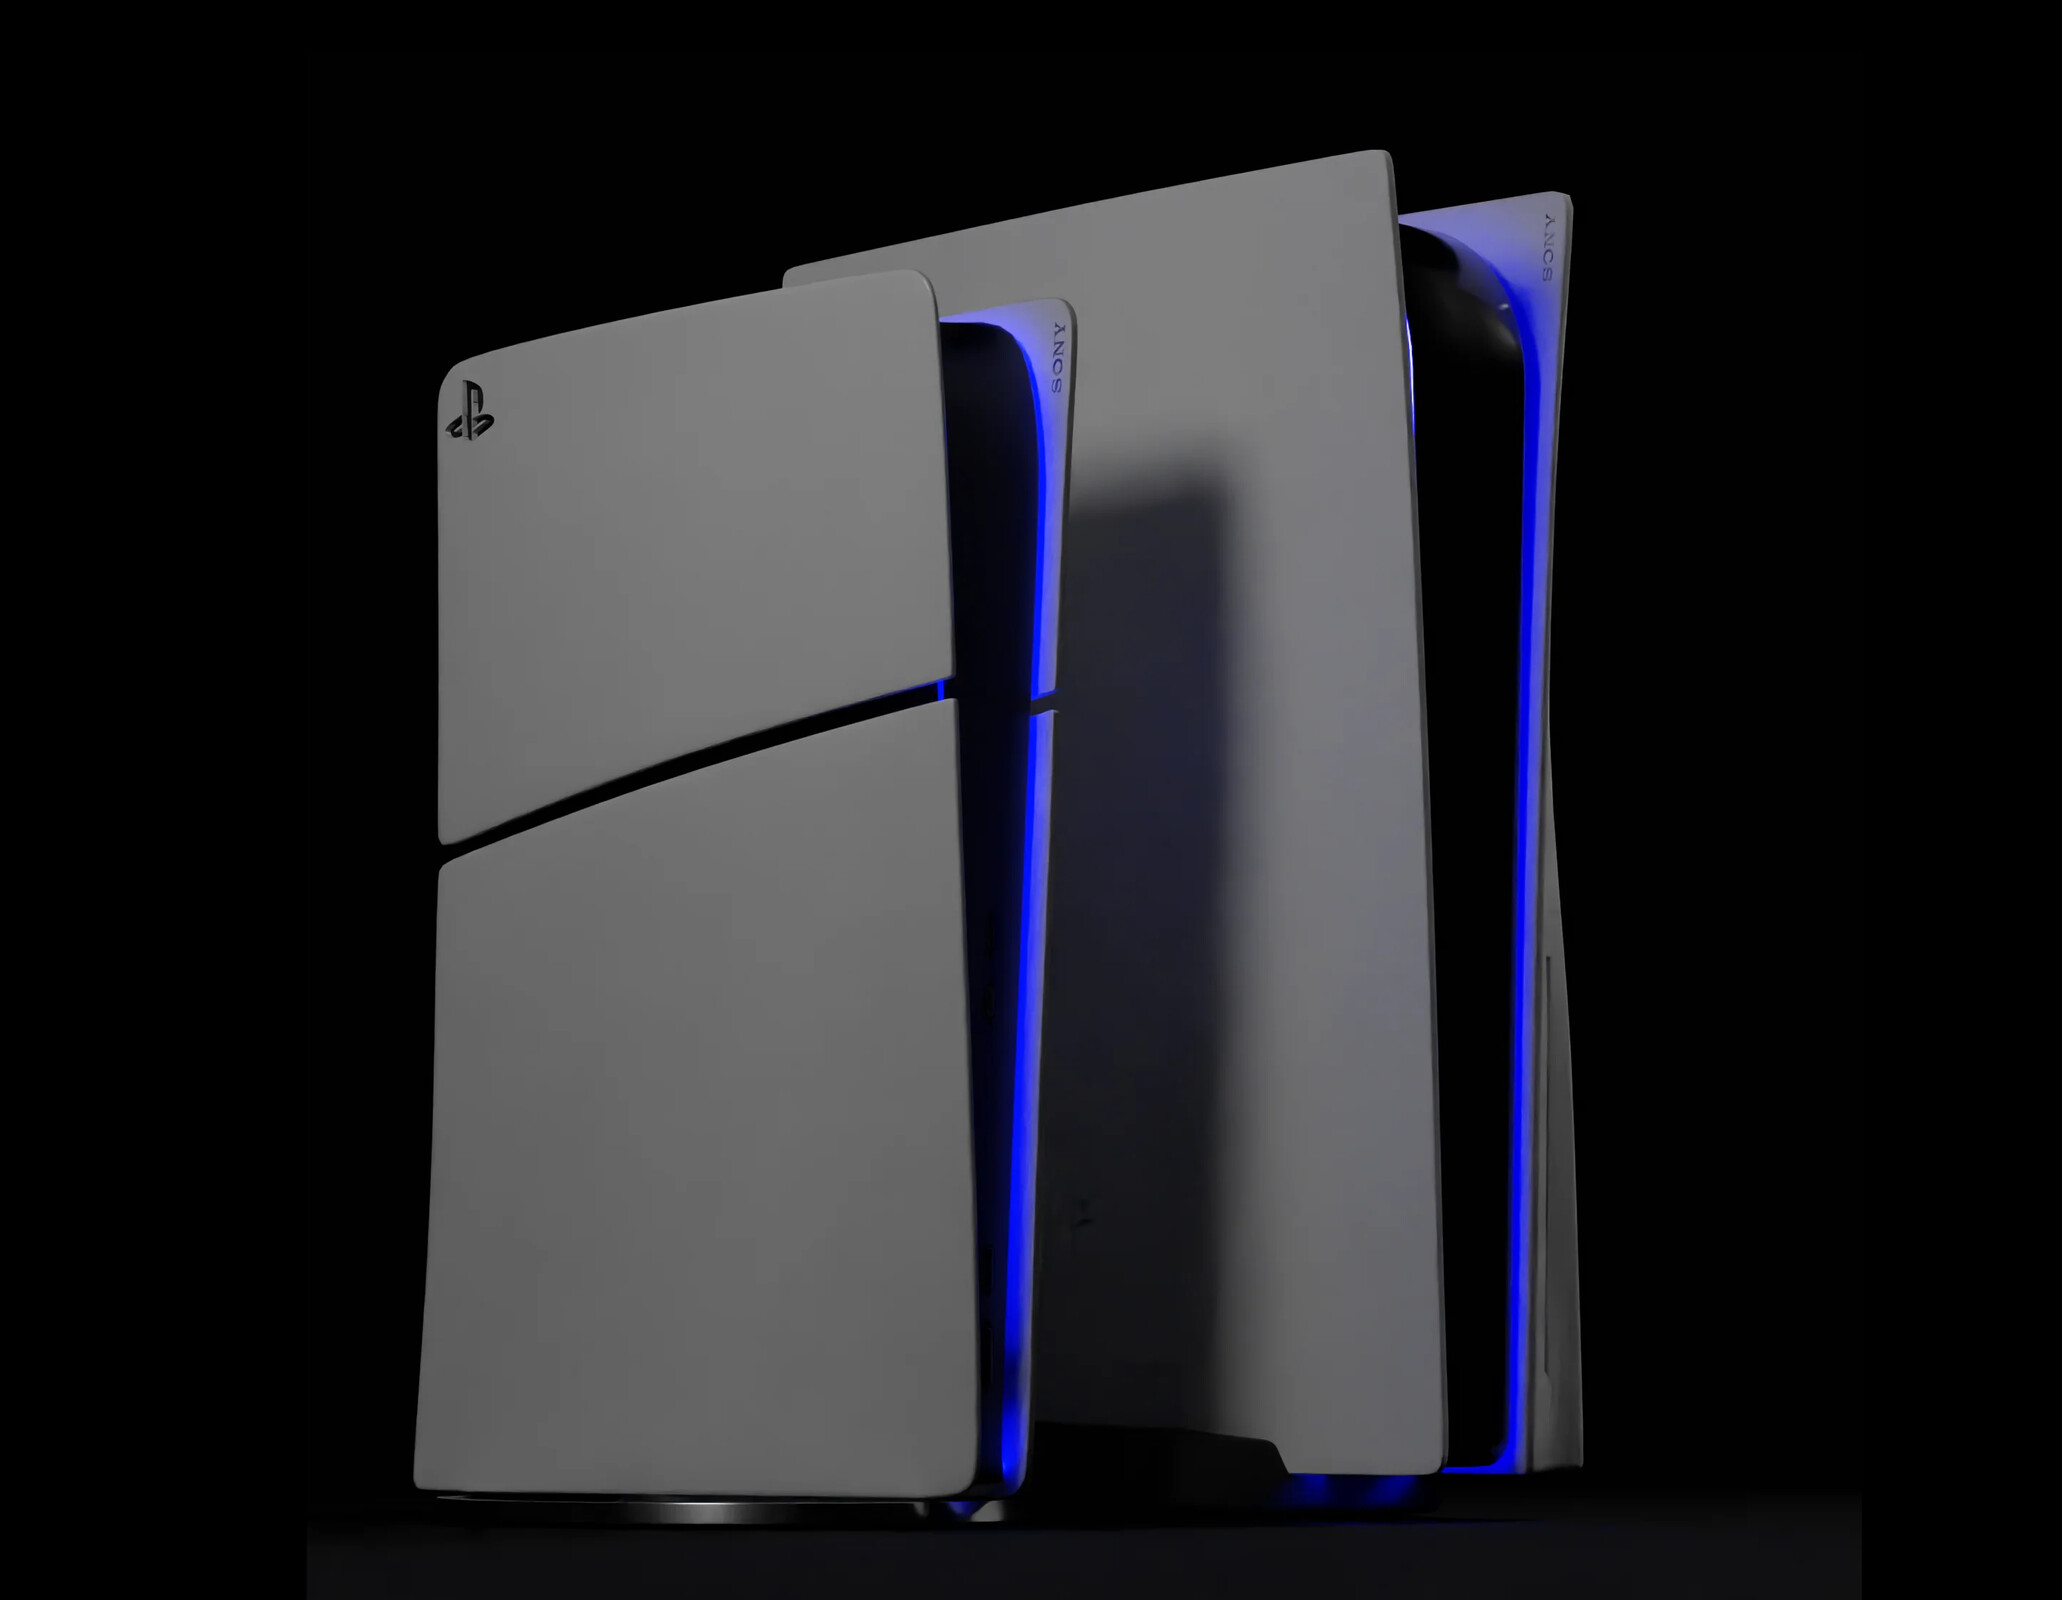 PS5 Slim vs PS5 size comparison: how much smaller is Sony's new